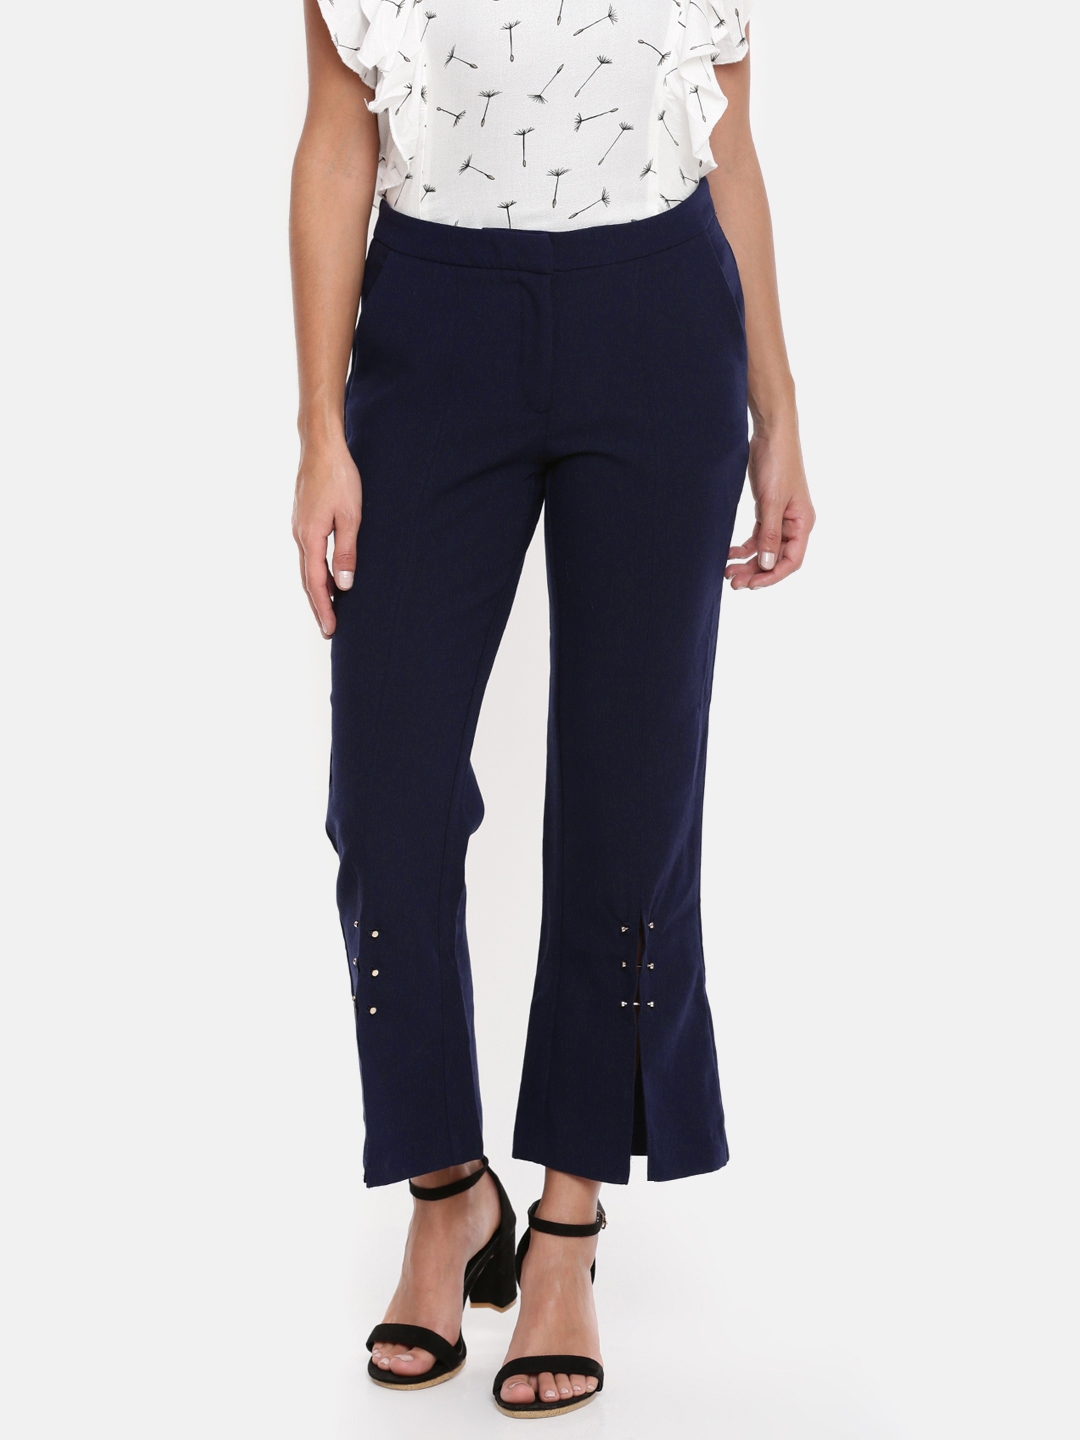 Miss Chase  Pants  Jumpsuits  Miss Chase Women Navy Blue Regular Fit  Solid Bootcut Trousers Sizemedium  Poshmark